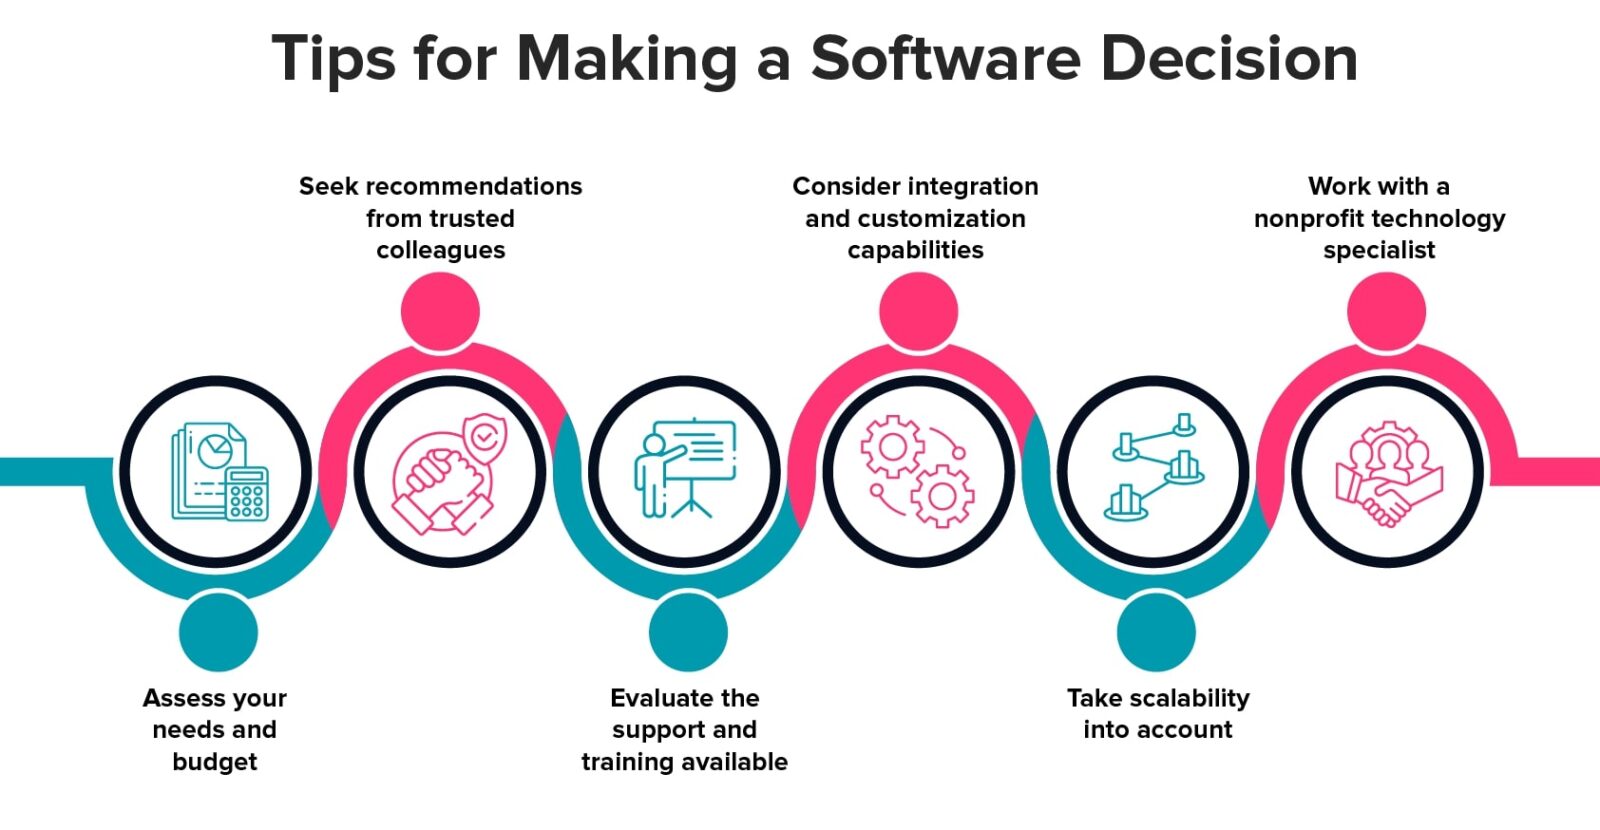 This image and the text below give some tips for making your own software provider decision.